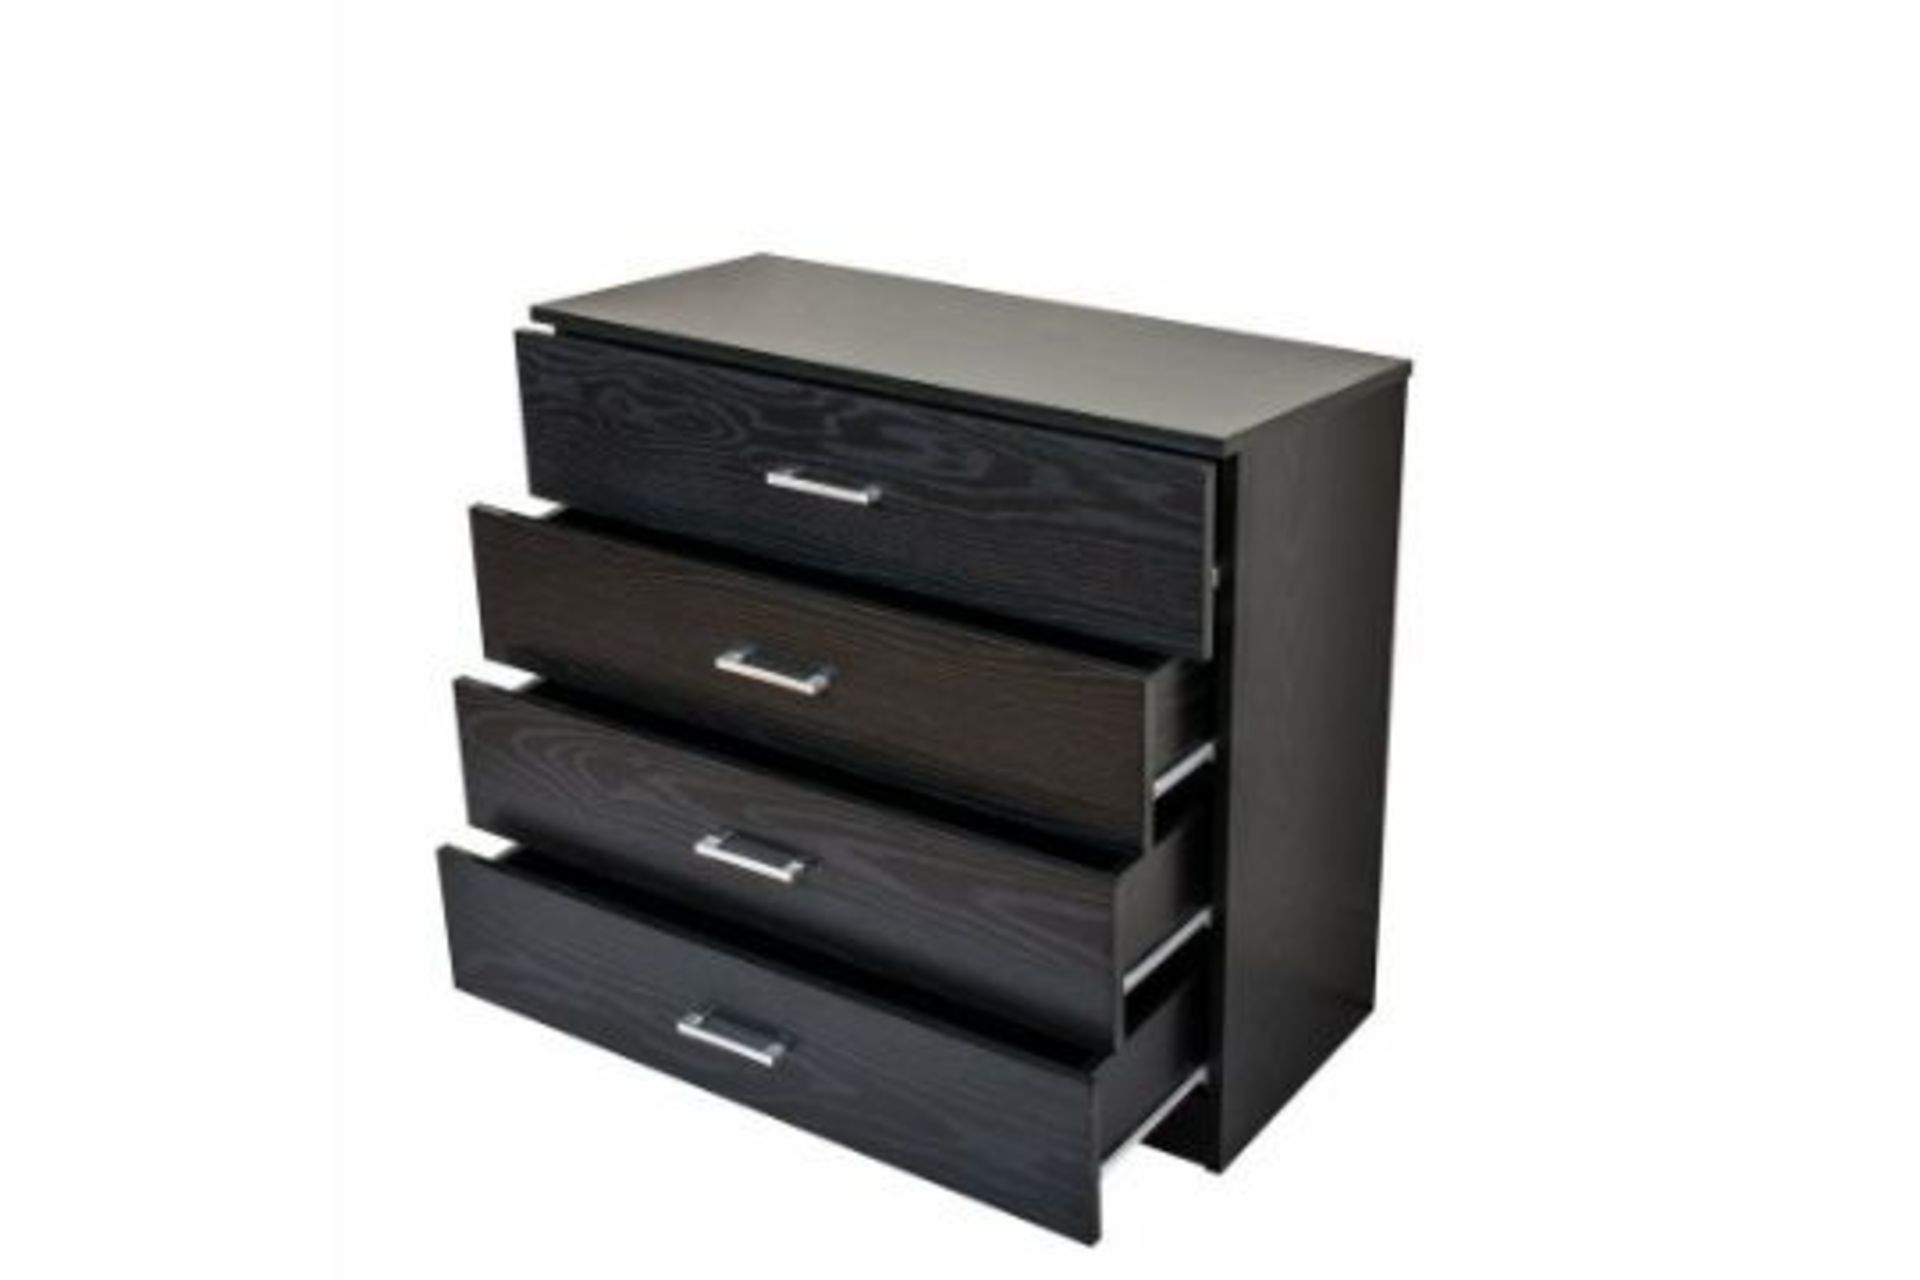 EMMYLOU 4 DRAWER CHEST - RRP £57.99 - Image 2 of 2